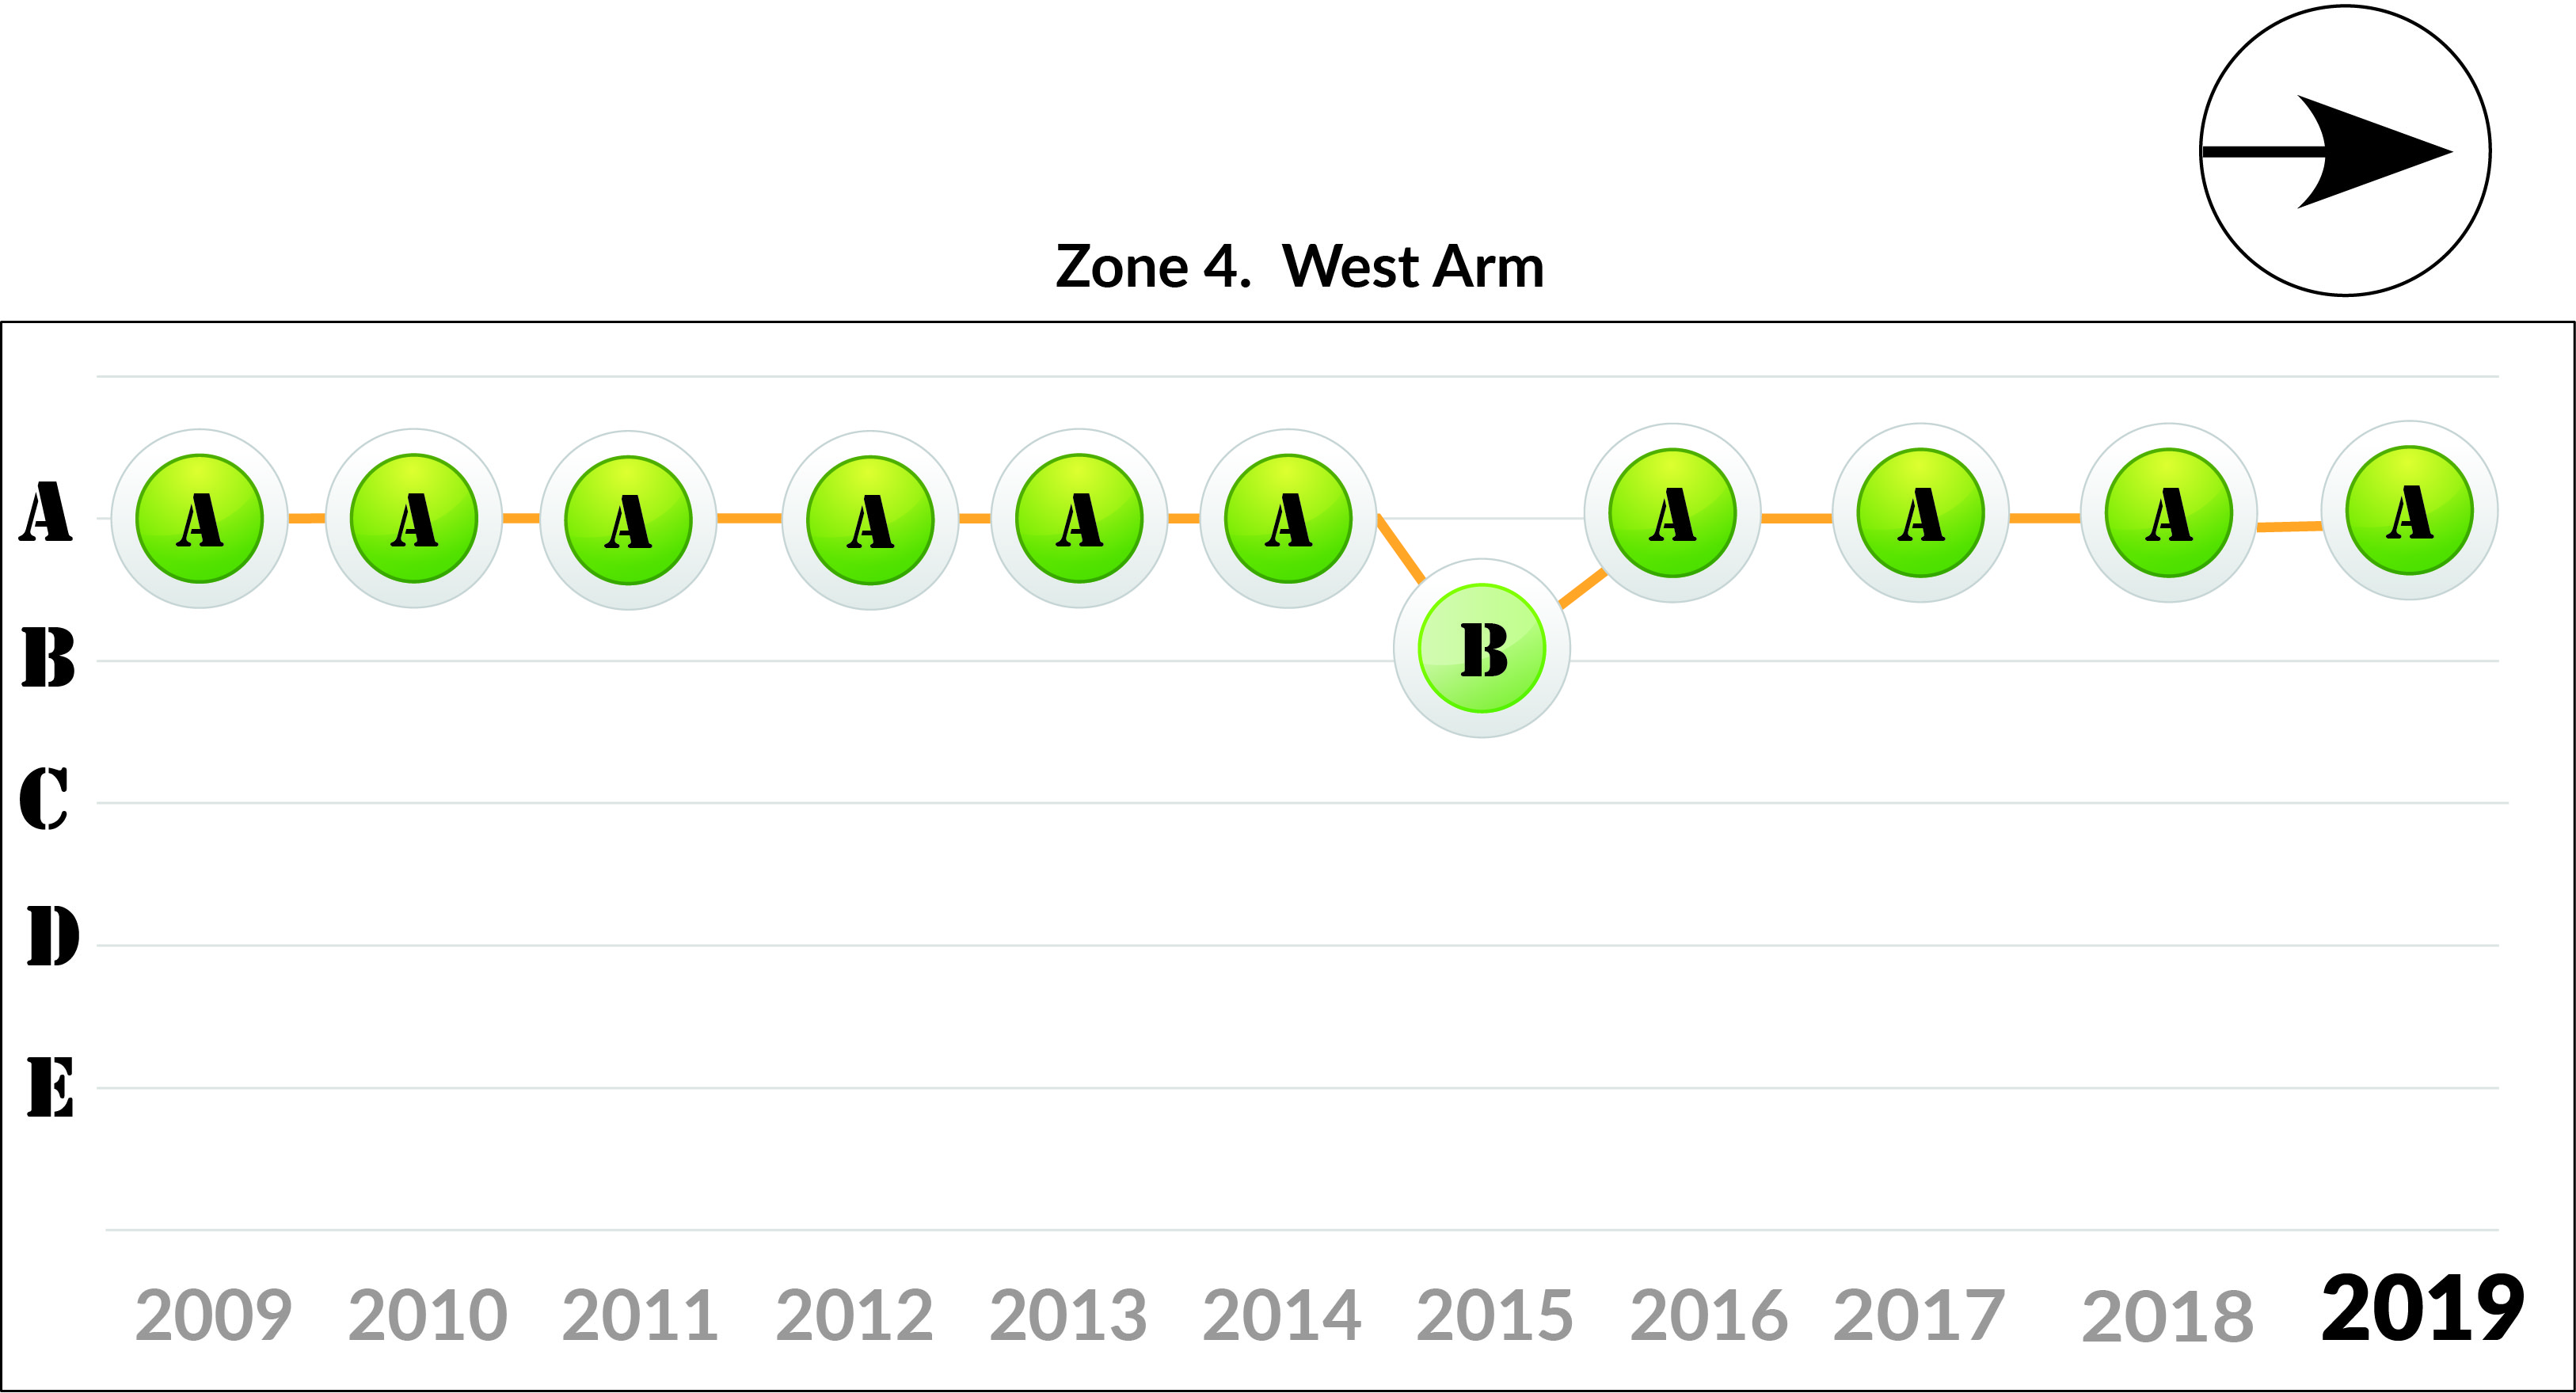 Zone 4 West Arm trends